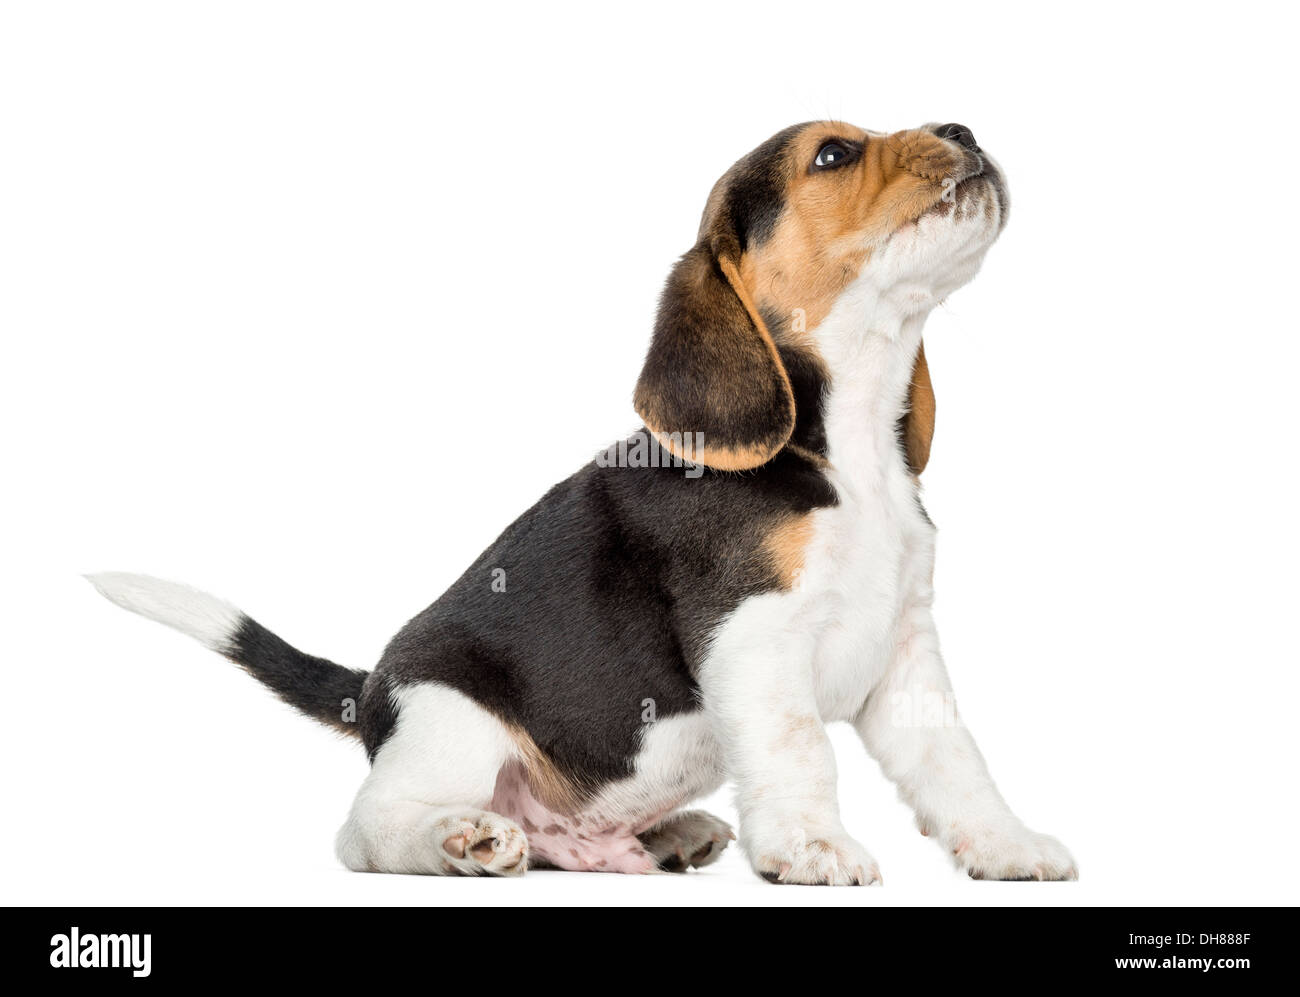 Side view of a Beagle puppy sitting and howling, looking up against white background Stock Photo